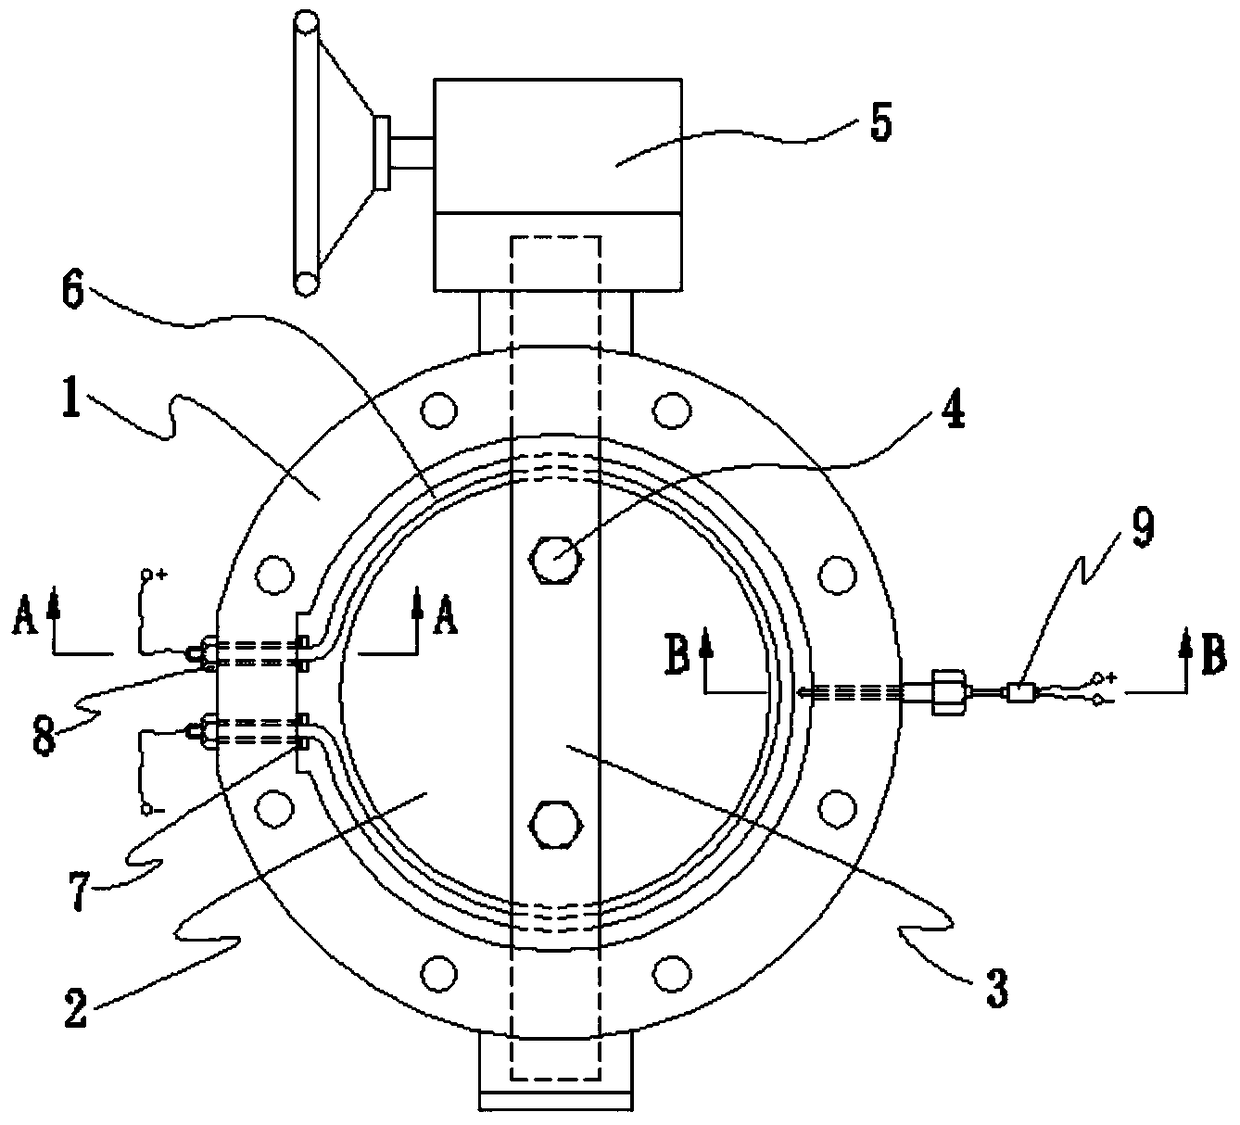 Device and method for heating butterfly valve